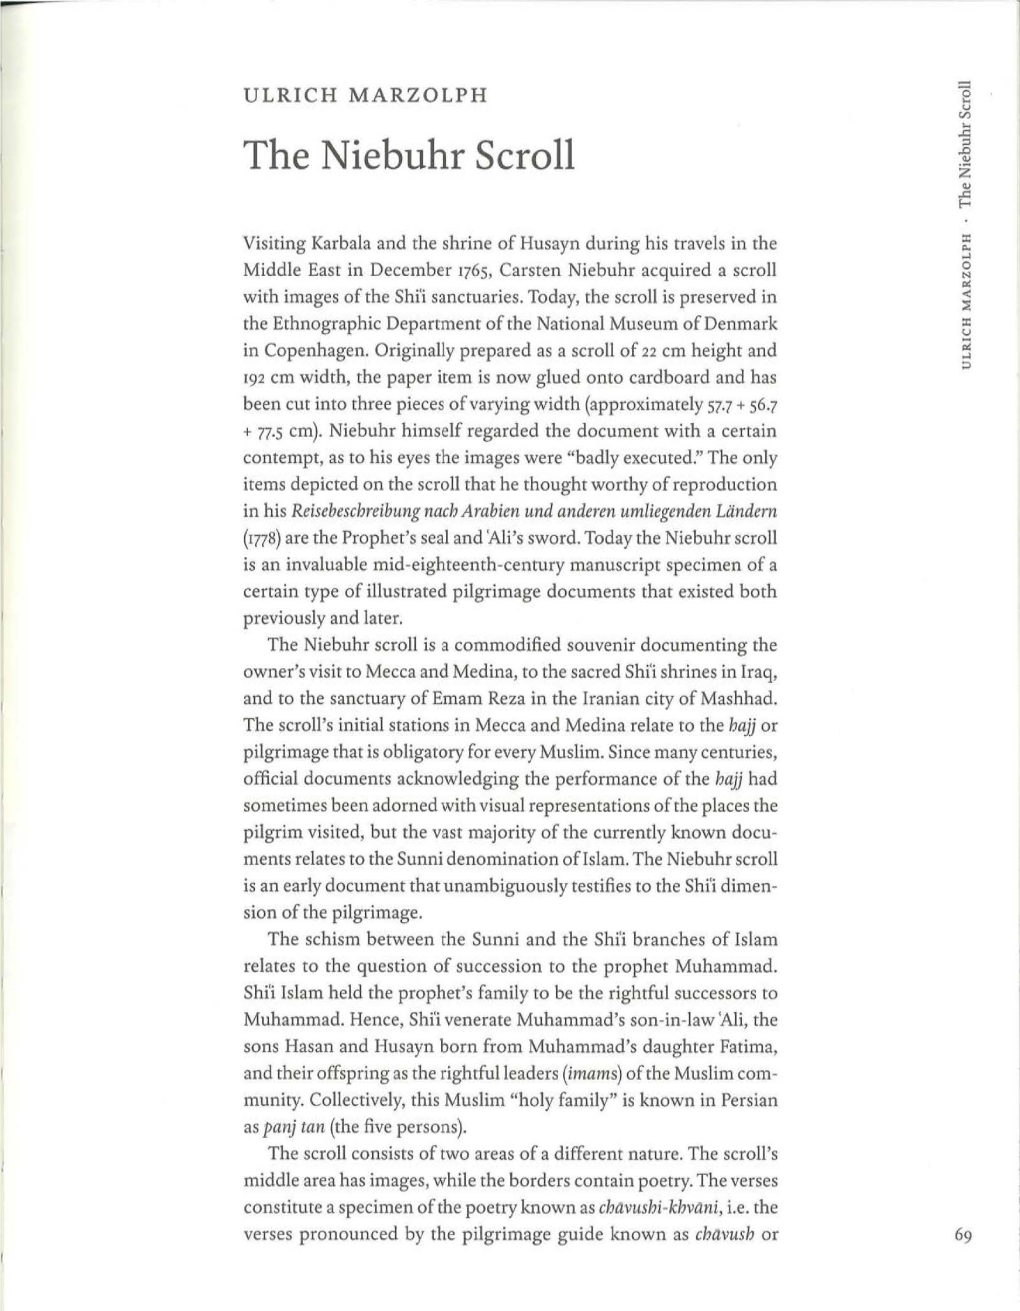 The Niebuhr Scroll